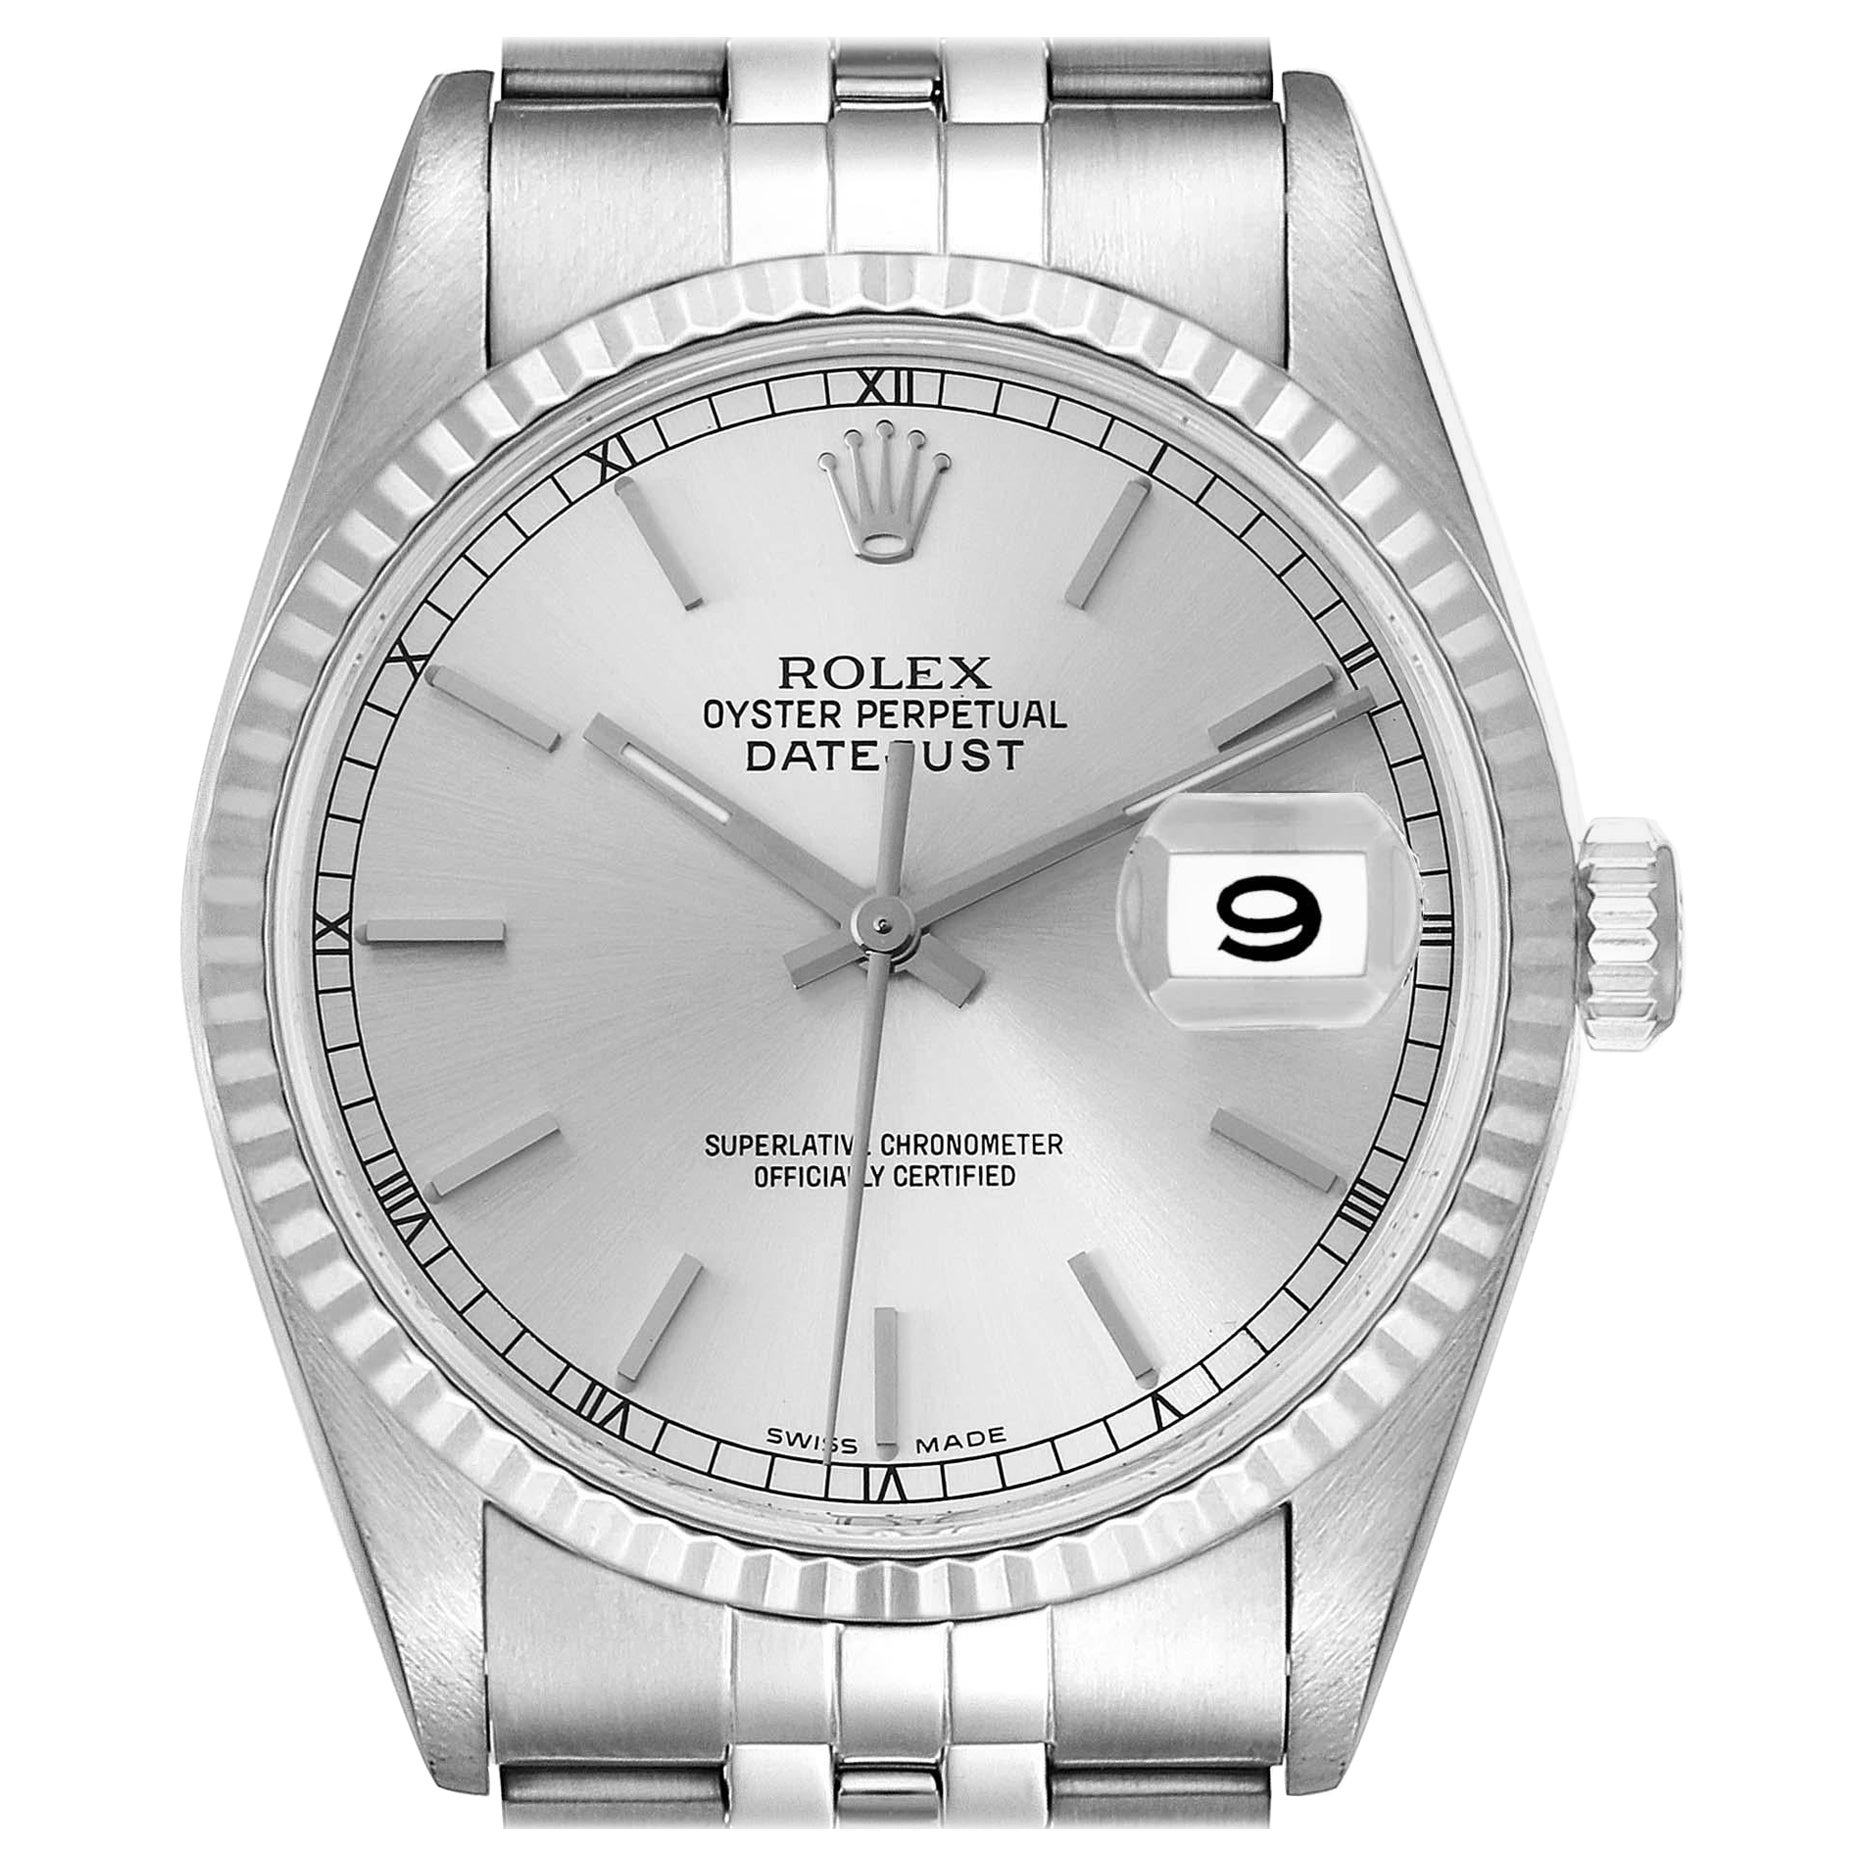 Rolex Datejust Silver Dial Steel White Gold Mens Watch 16234 For Sale